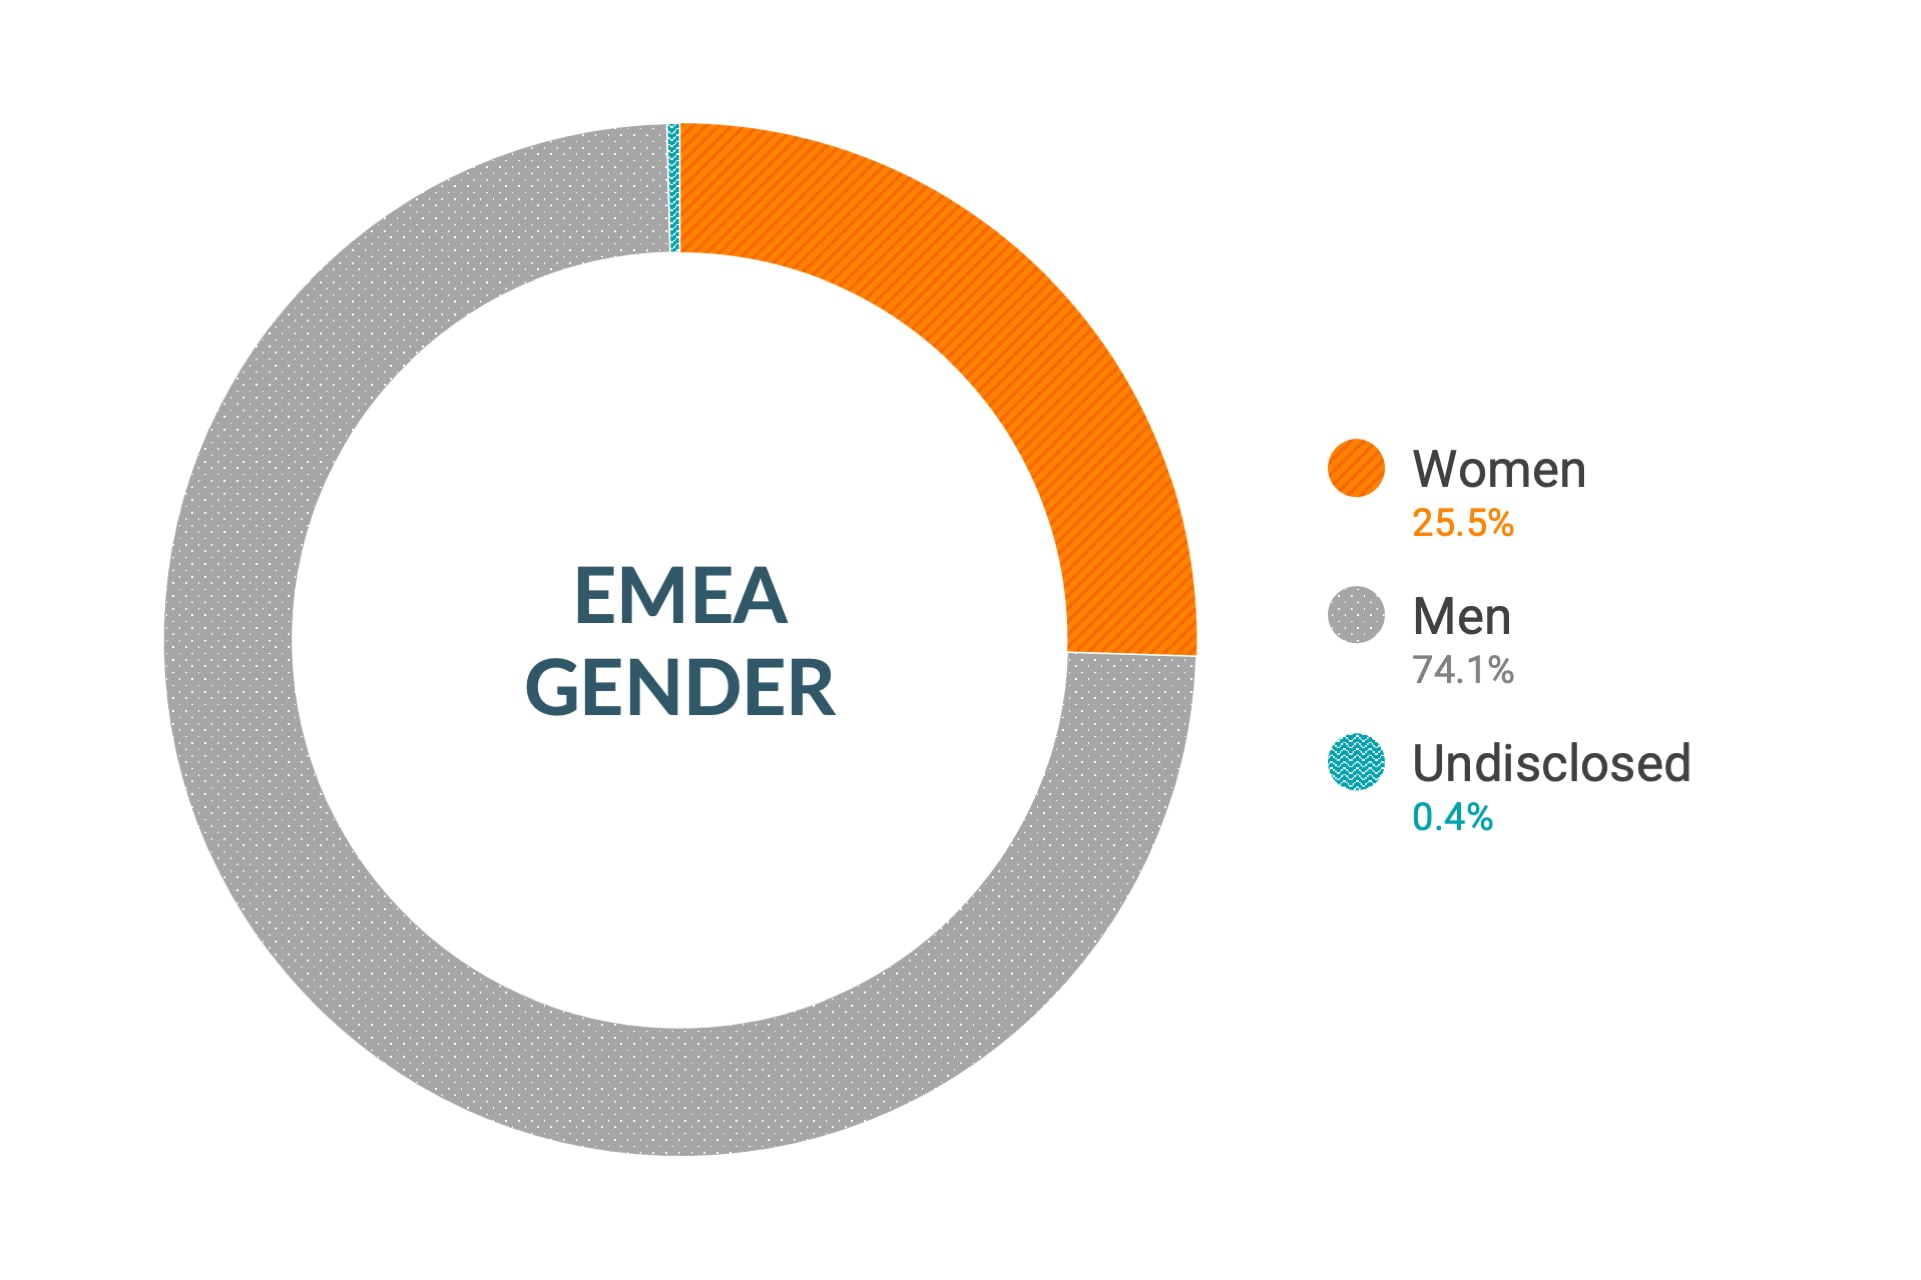 Cloudera Diversity and Inclusion data for EMEA Gender: Women 25.7%, Men 73.9%, Undisclosed 0.4%